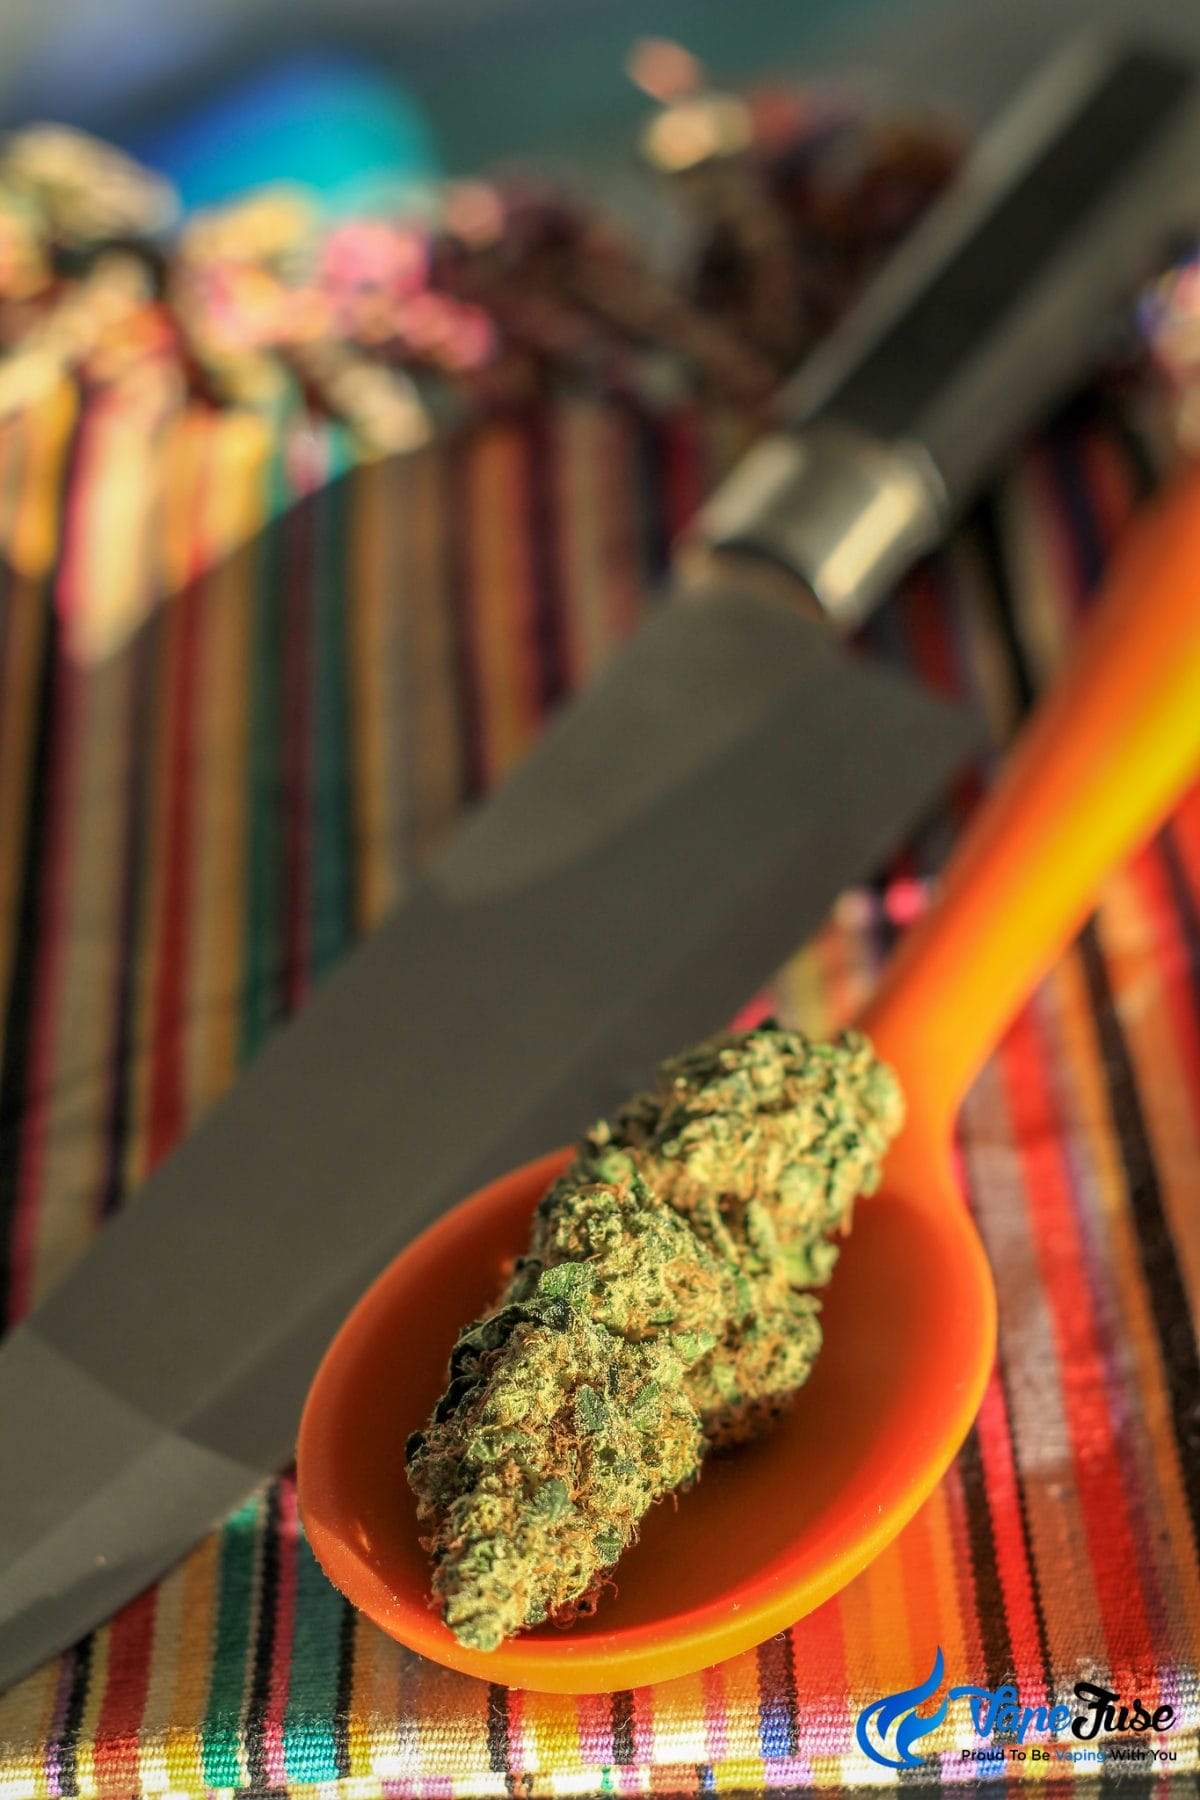 Cooking with vaporized cannabis herbs